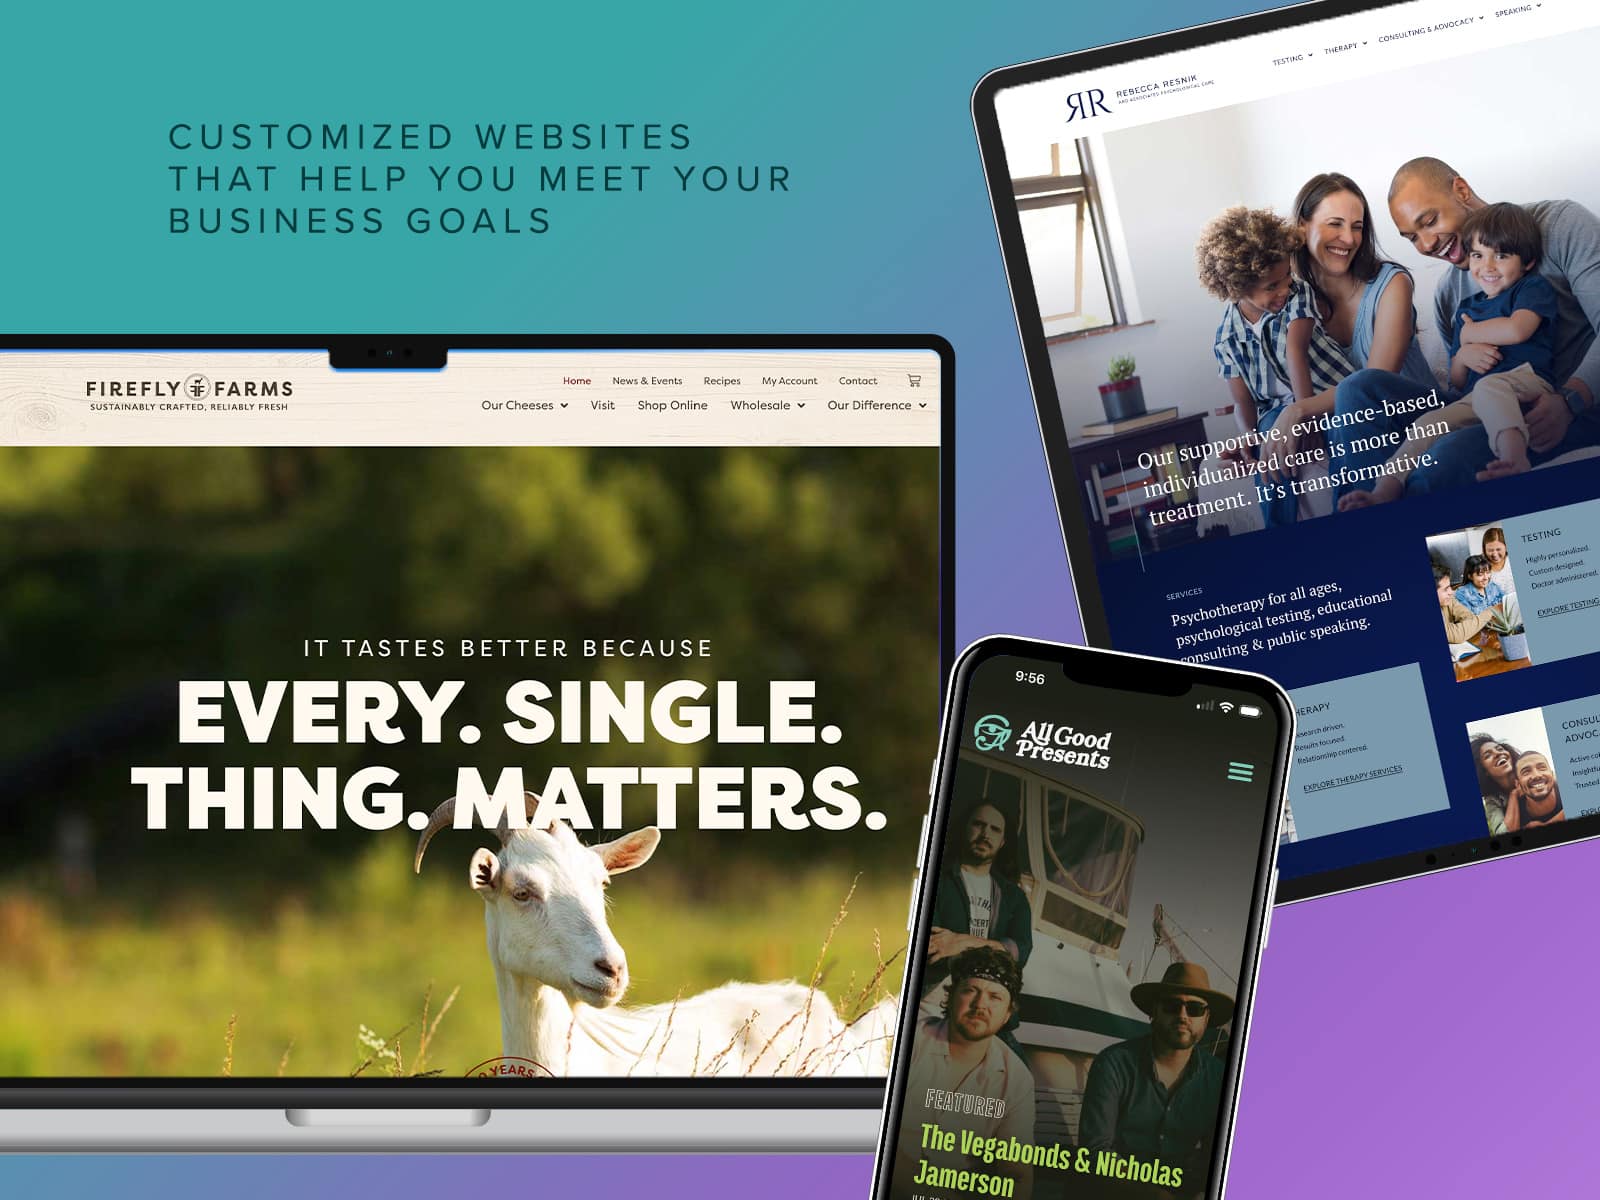 Beyond Templates: How a Custom Website Design Can Differentiate Your Business